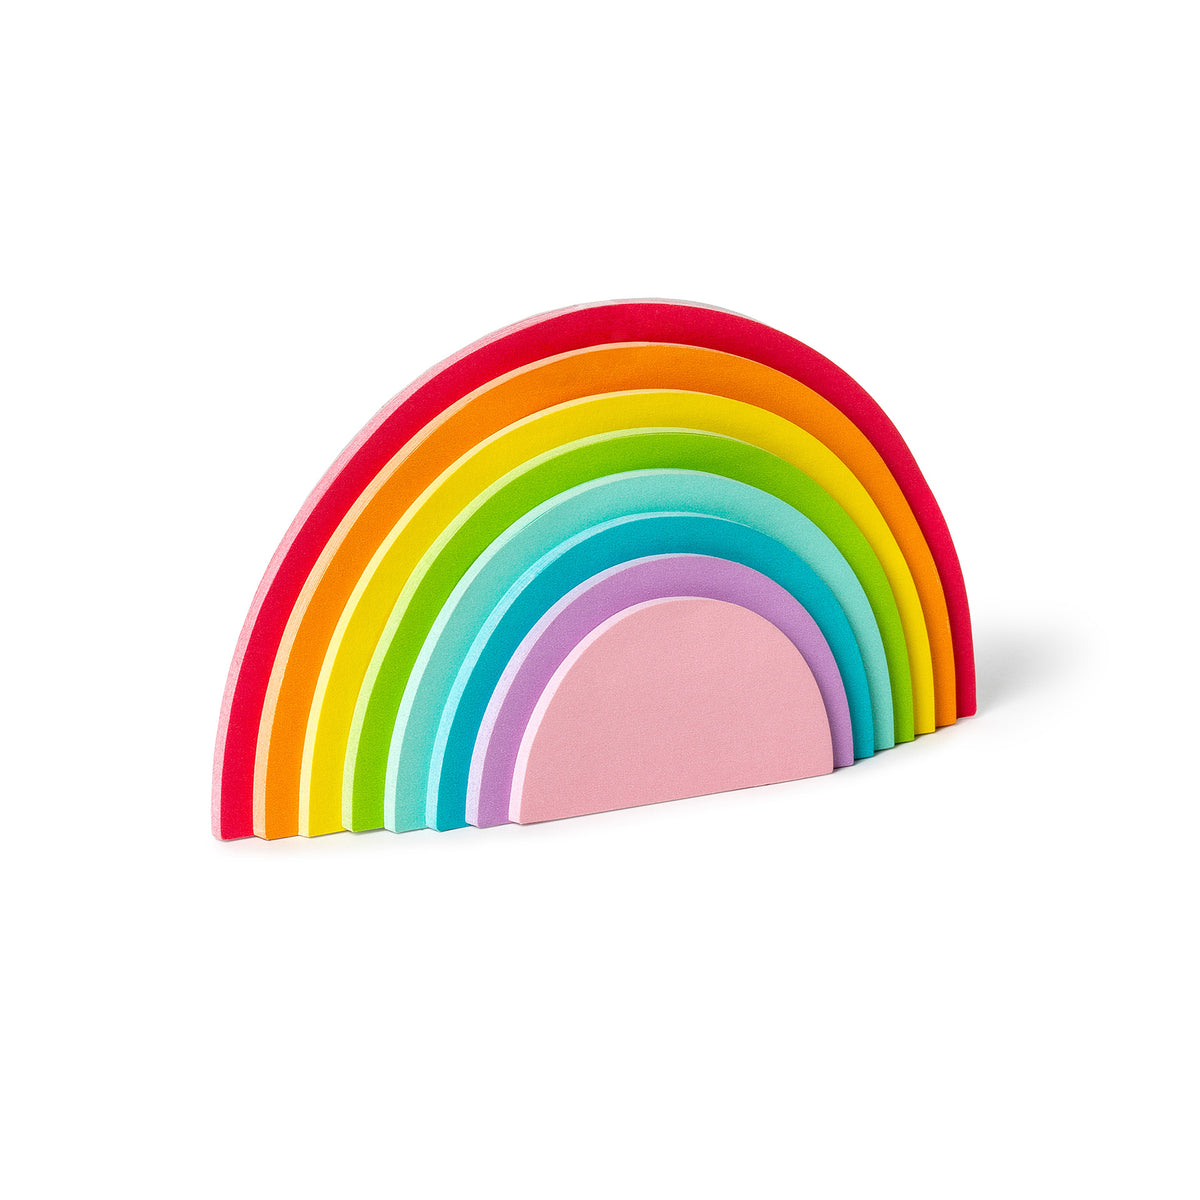 An image of a sticky notes pad in the shape of a rainbow. There are a range of brightly coloured sections stacked on top of one another to make the shape of a rainbow.